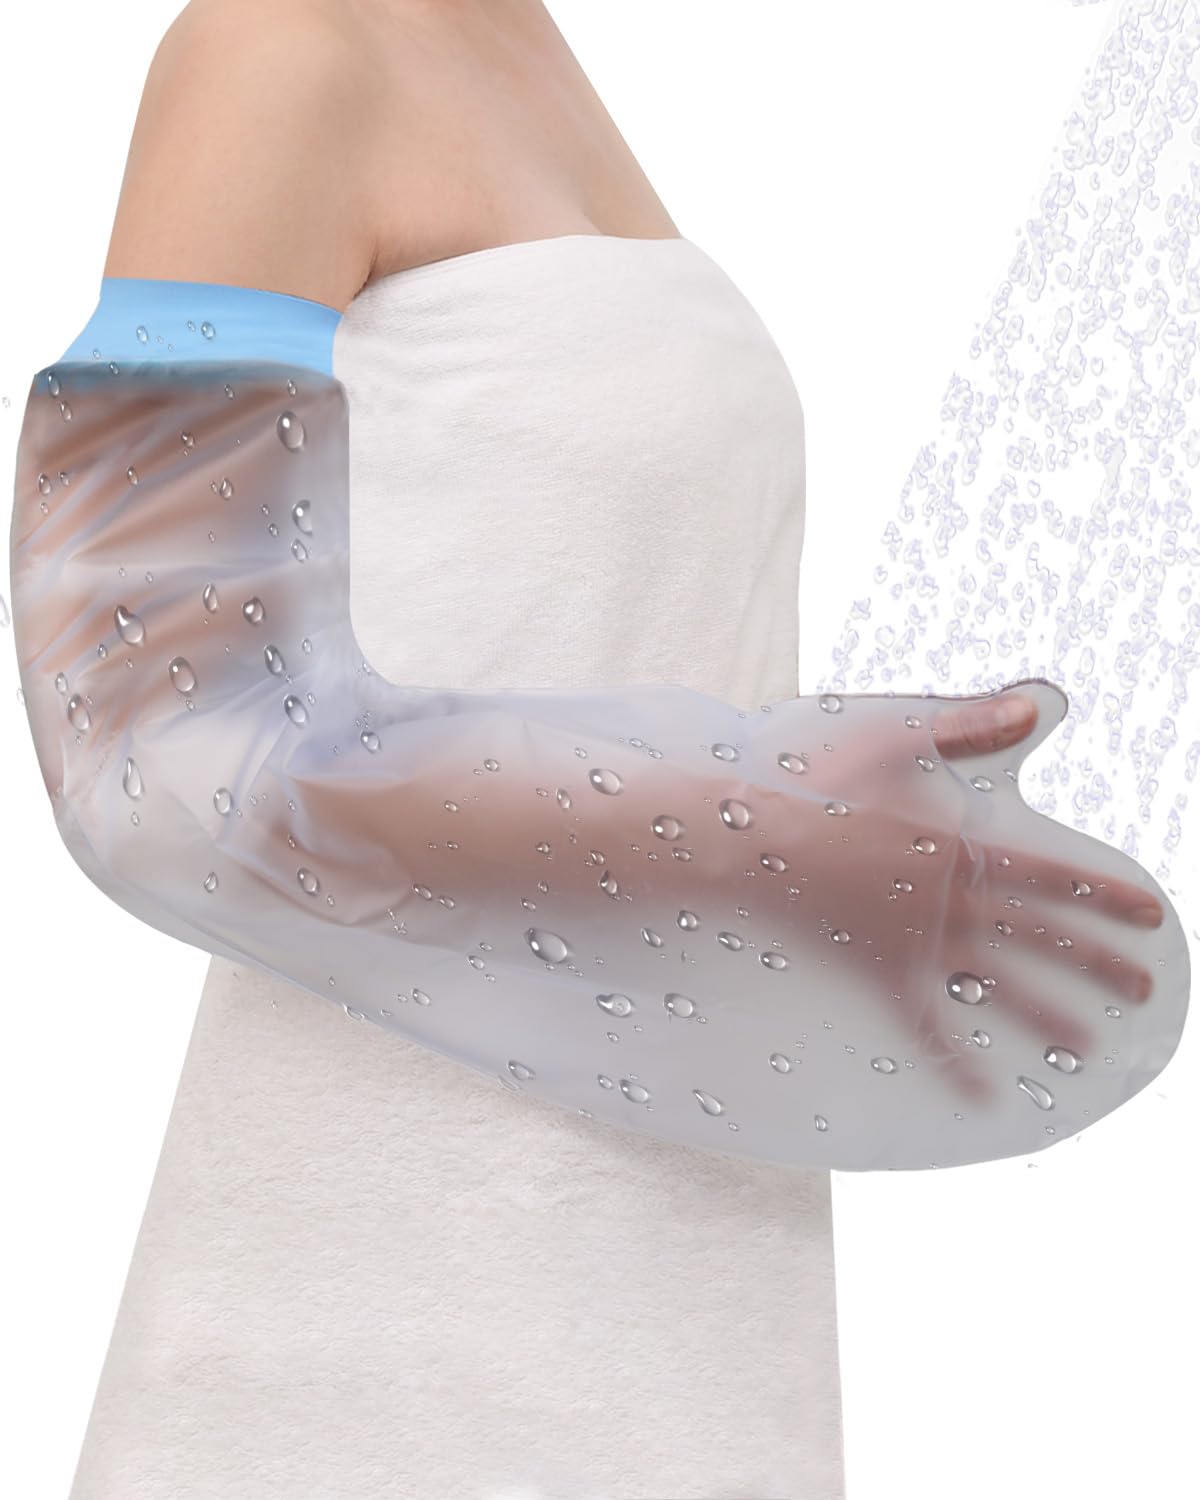 Mgaxyff Hand Cast,Waterproof Cast Bandage Protector Wound Fracture Hand  Cover for Shower Adult, Wound Arm Cover 